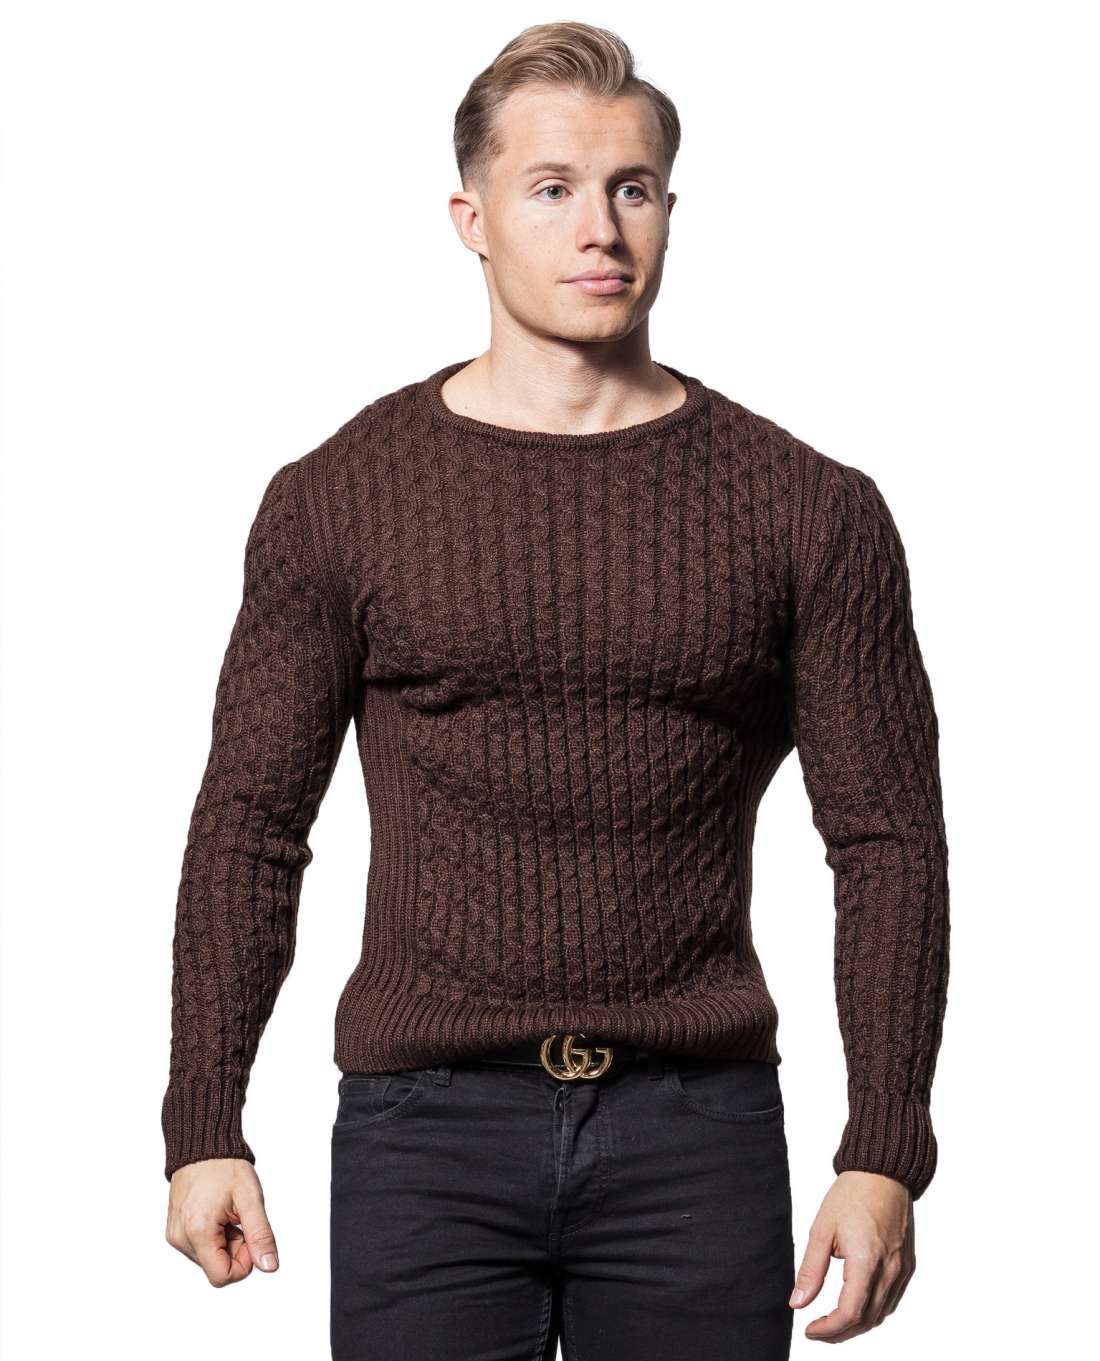 Christian Brown Knit Jerone